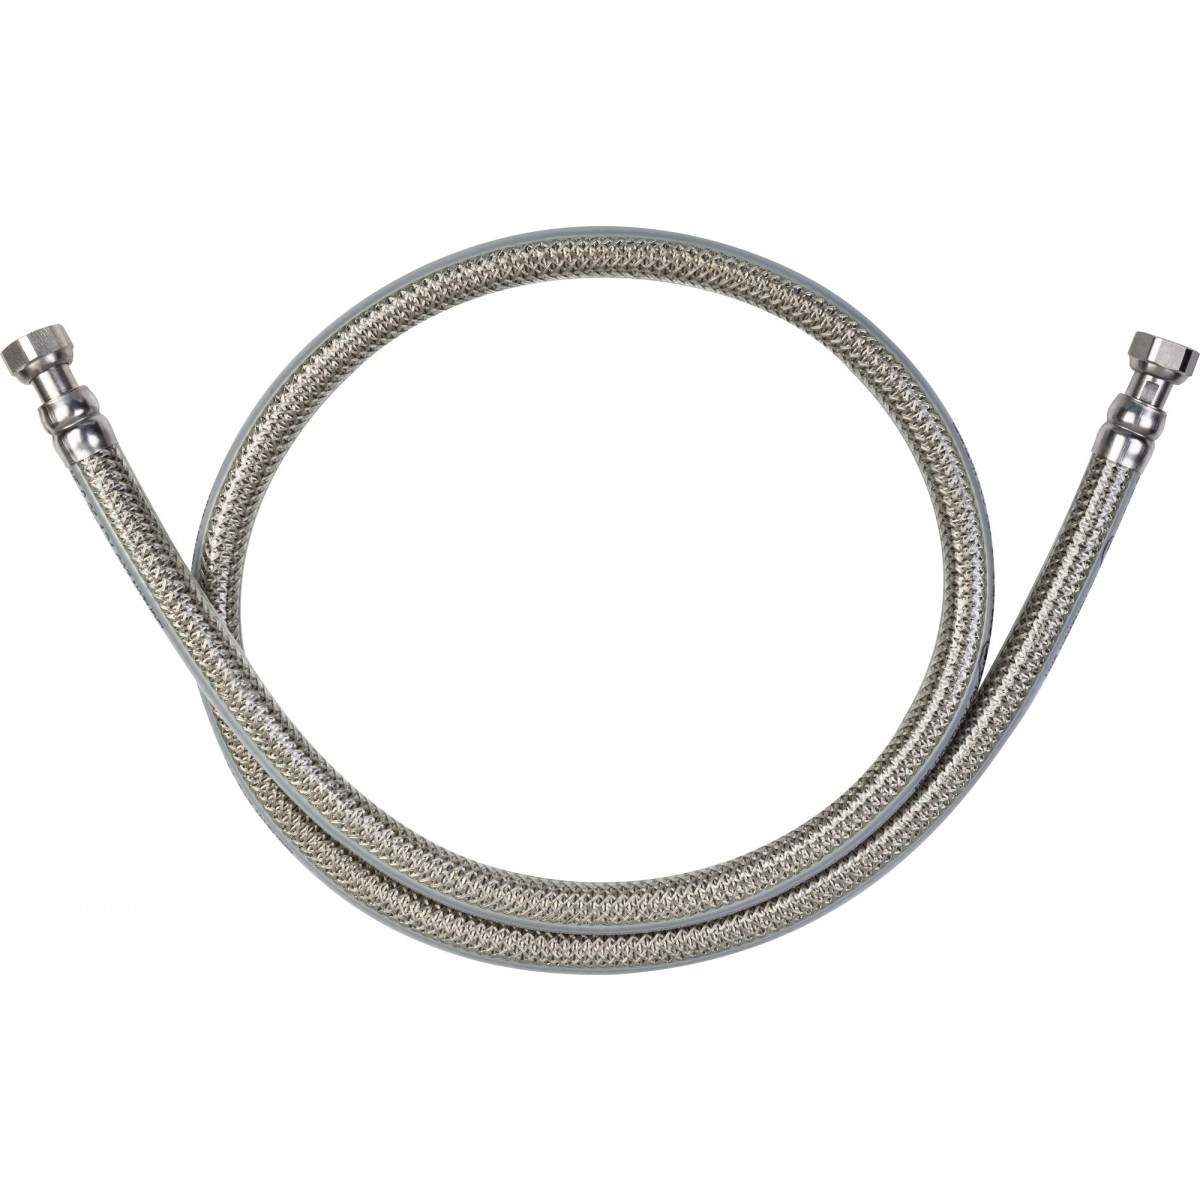 Stainless steel hose for natural gas, unlimited duration, length 1m